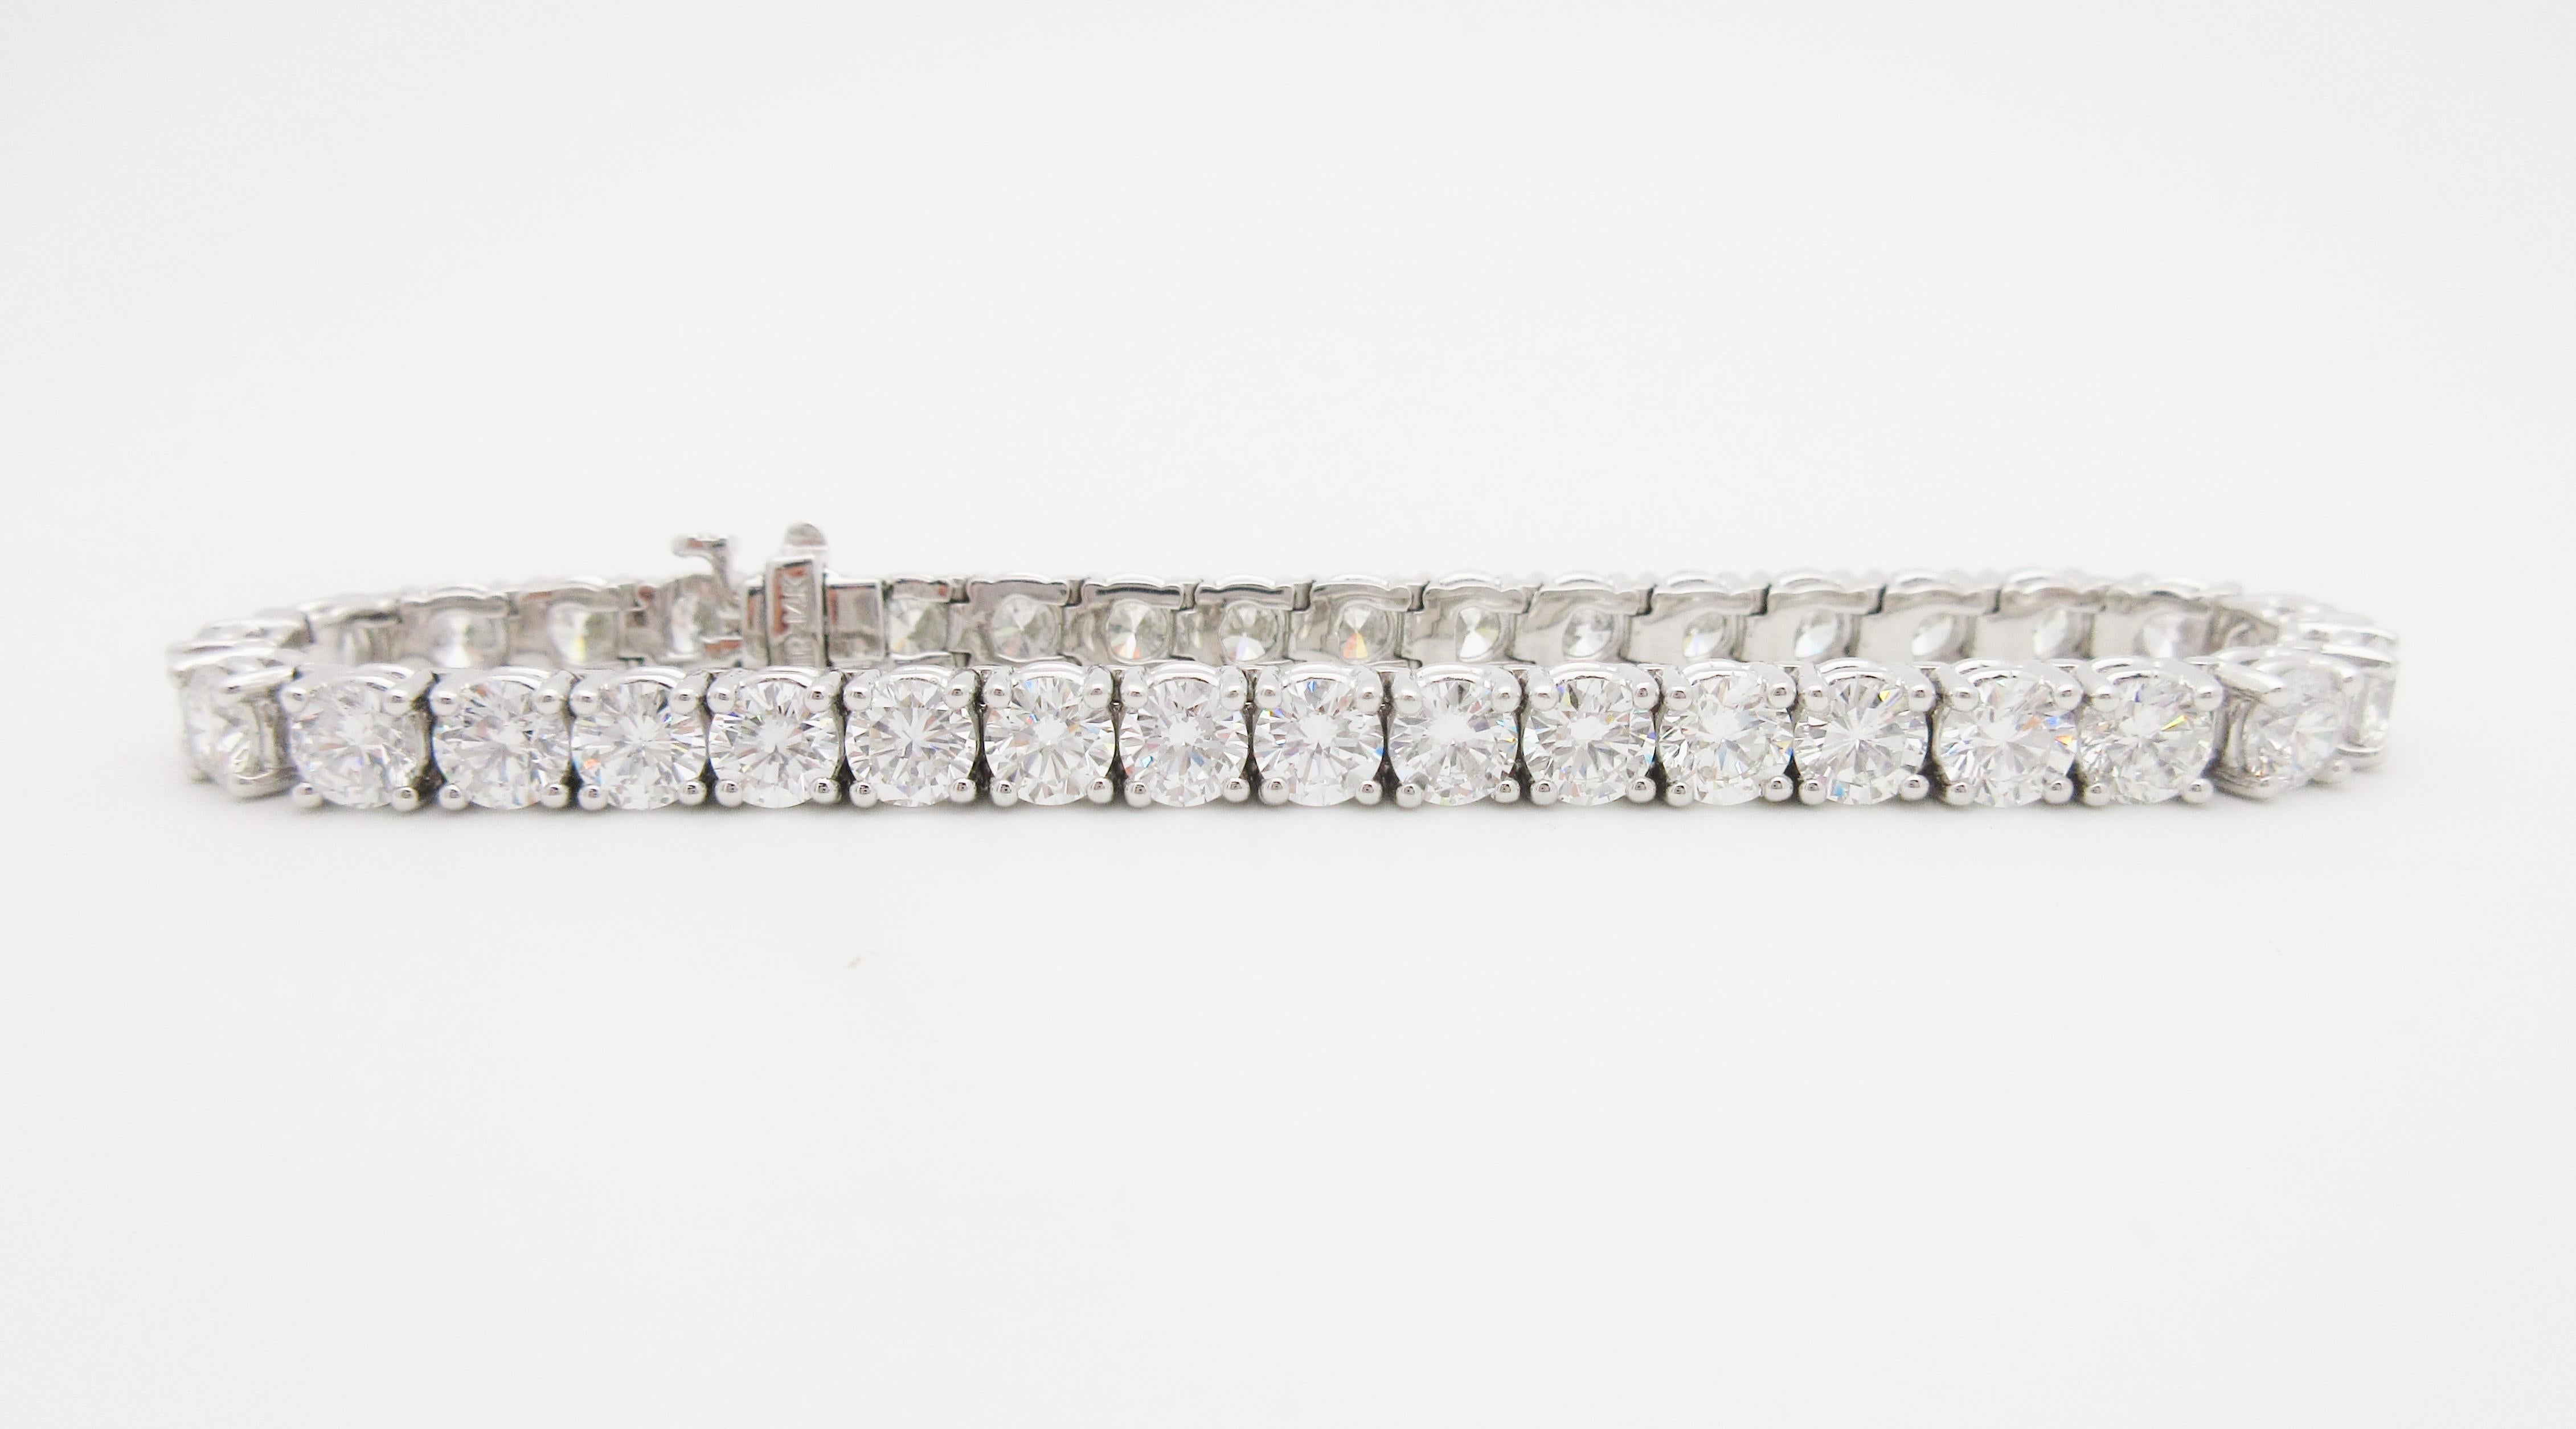 This luxurious tennis bracelet is a custom-made statement piece.

The bracelet shines with 36 hand-selected, round brilliant diamonds. Each bright white stone weighs .40ct. for a total of 14.7cttw., which our Graduate Gemologist has graded G-H in